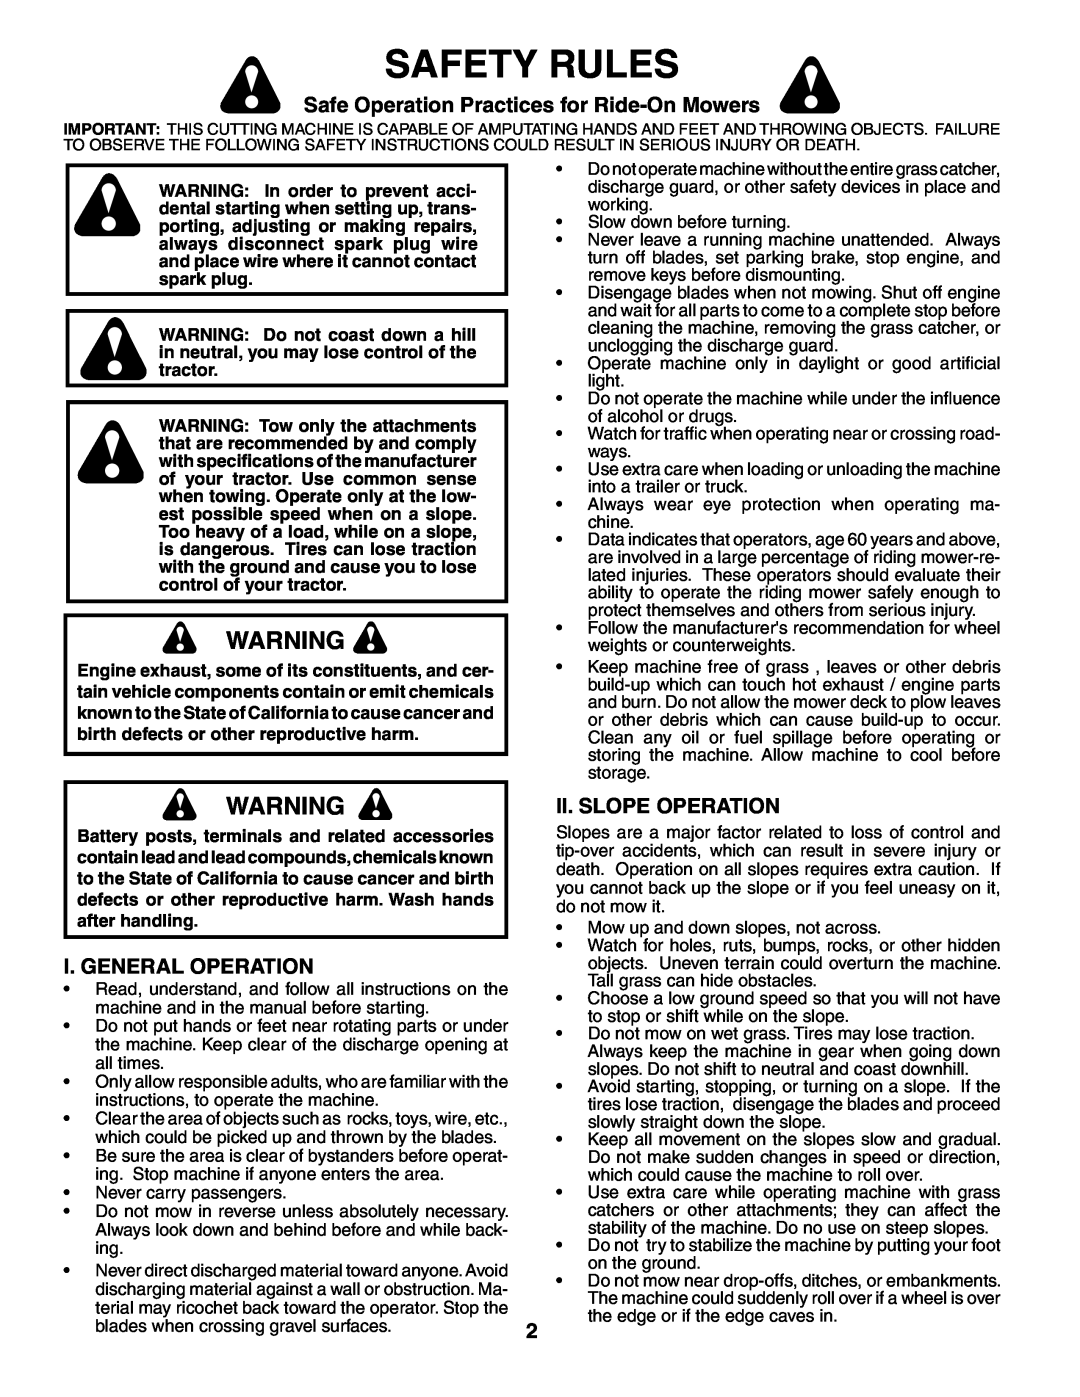 Poulan 960120003 Safety Rules, Safe Operation Practices for Ride-On Mowers, I. General Operation, Ii. Slope Operation 